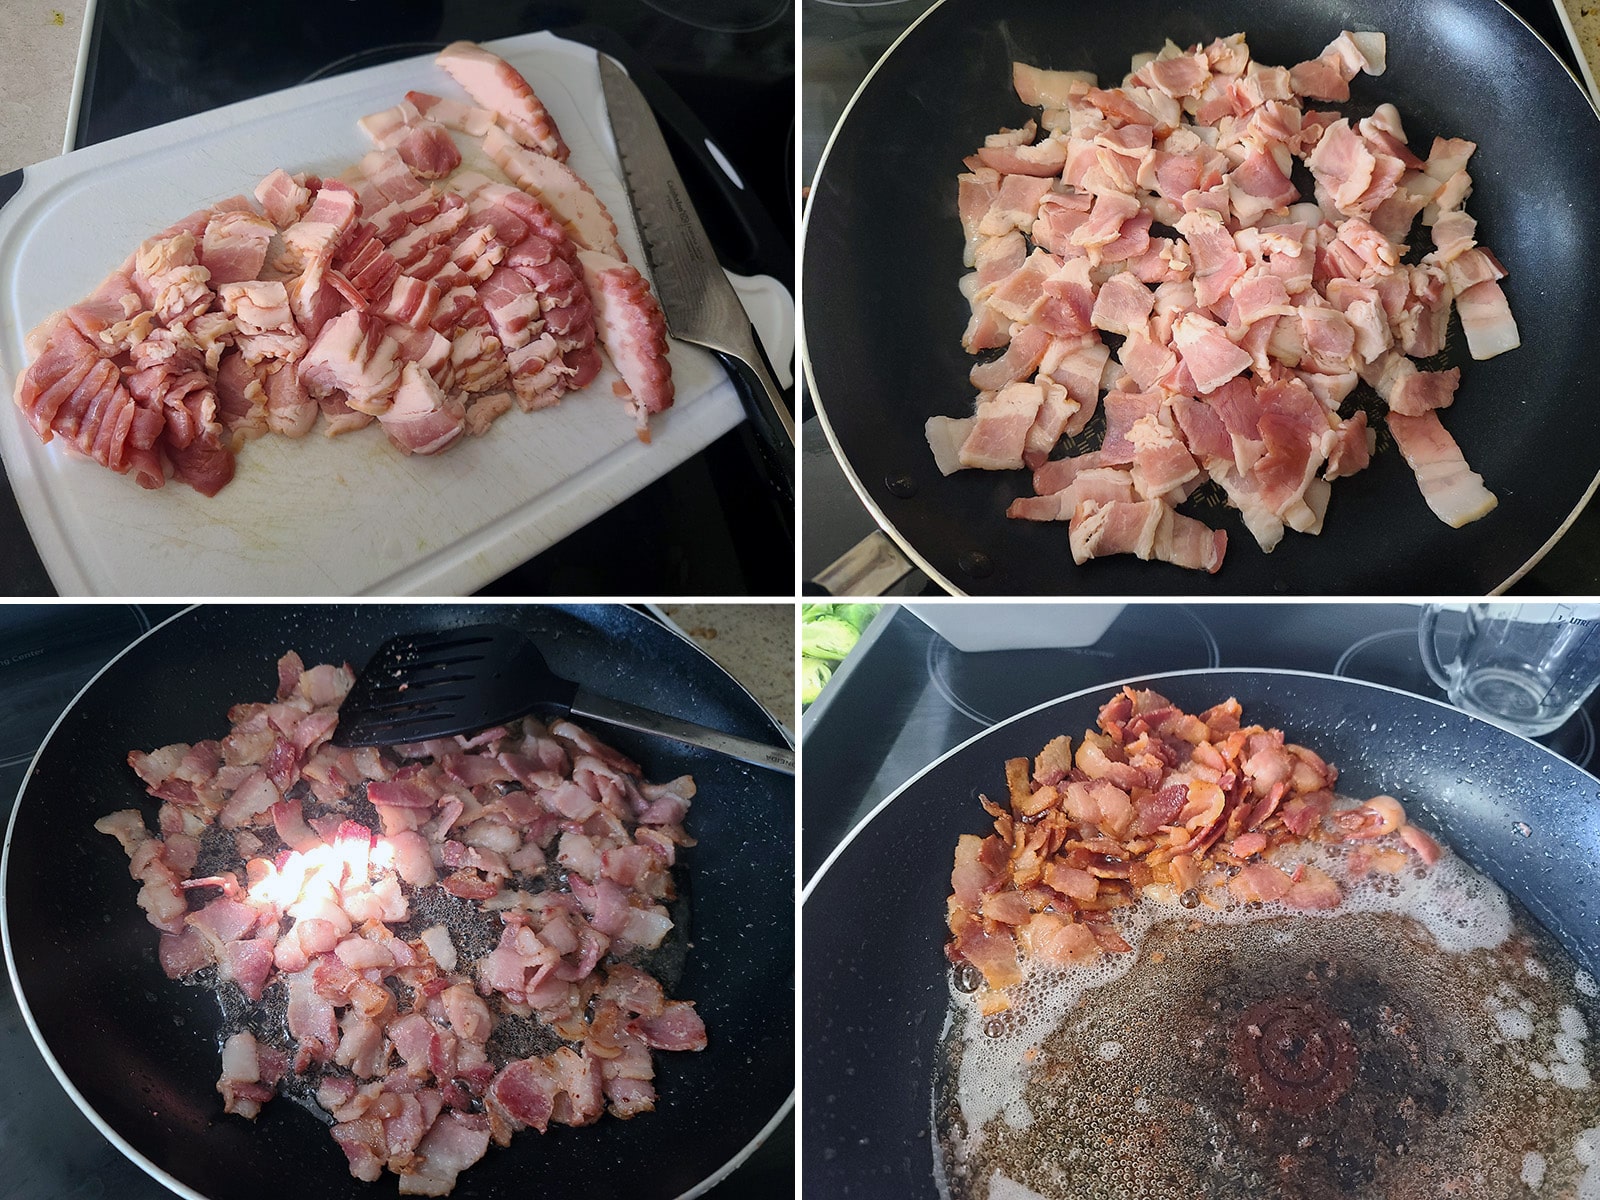 A 4 part image showing the bacon being chopped, cooked, and strained off the fat.